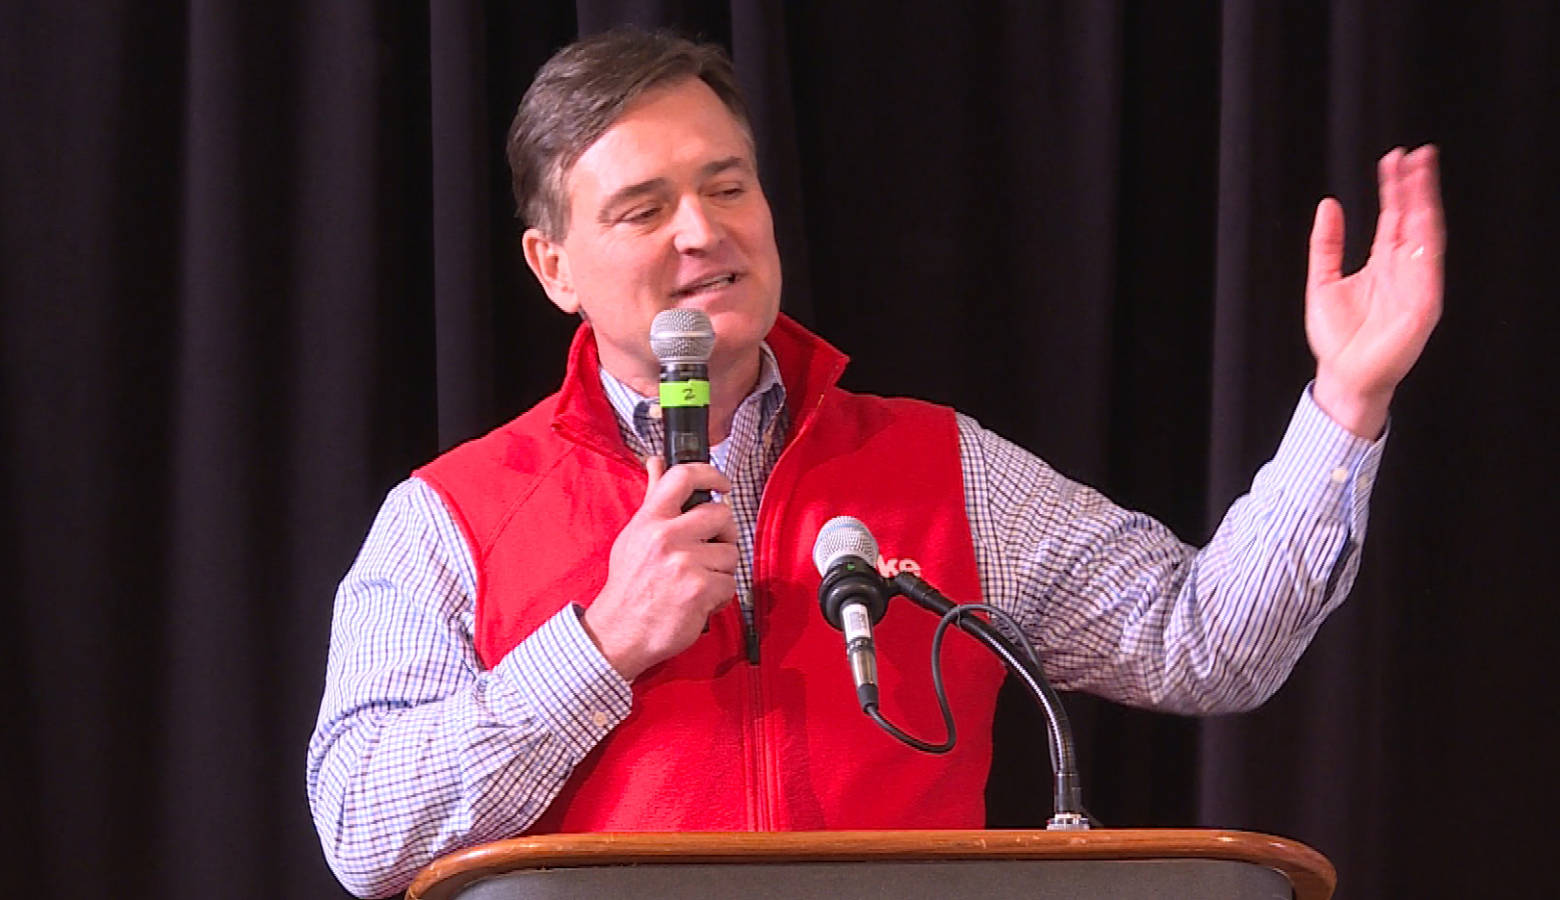 Rep. Luke Messer (R-Shelbyville) speaks to the crowd of state party activists before the straw poll vote. (Tyler Lake/WTIU)